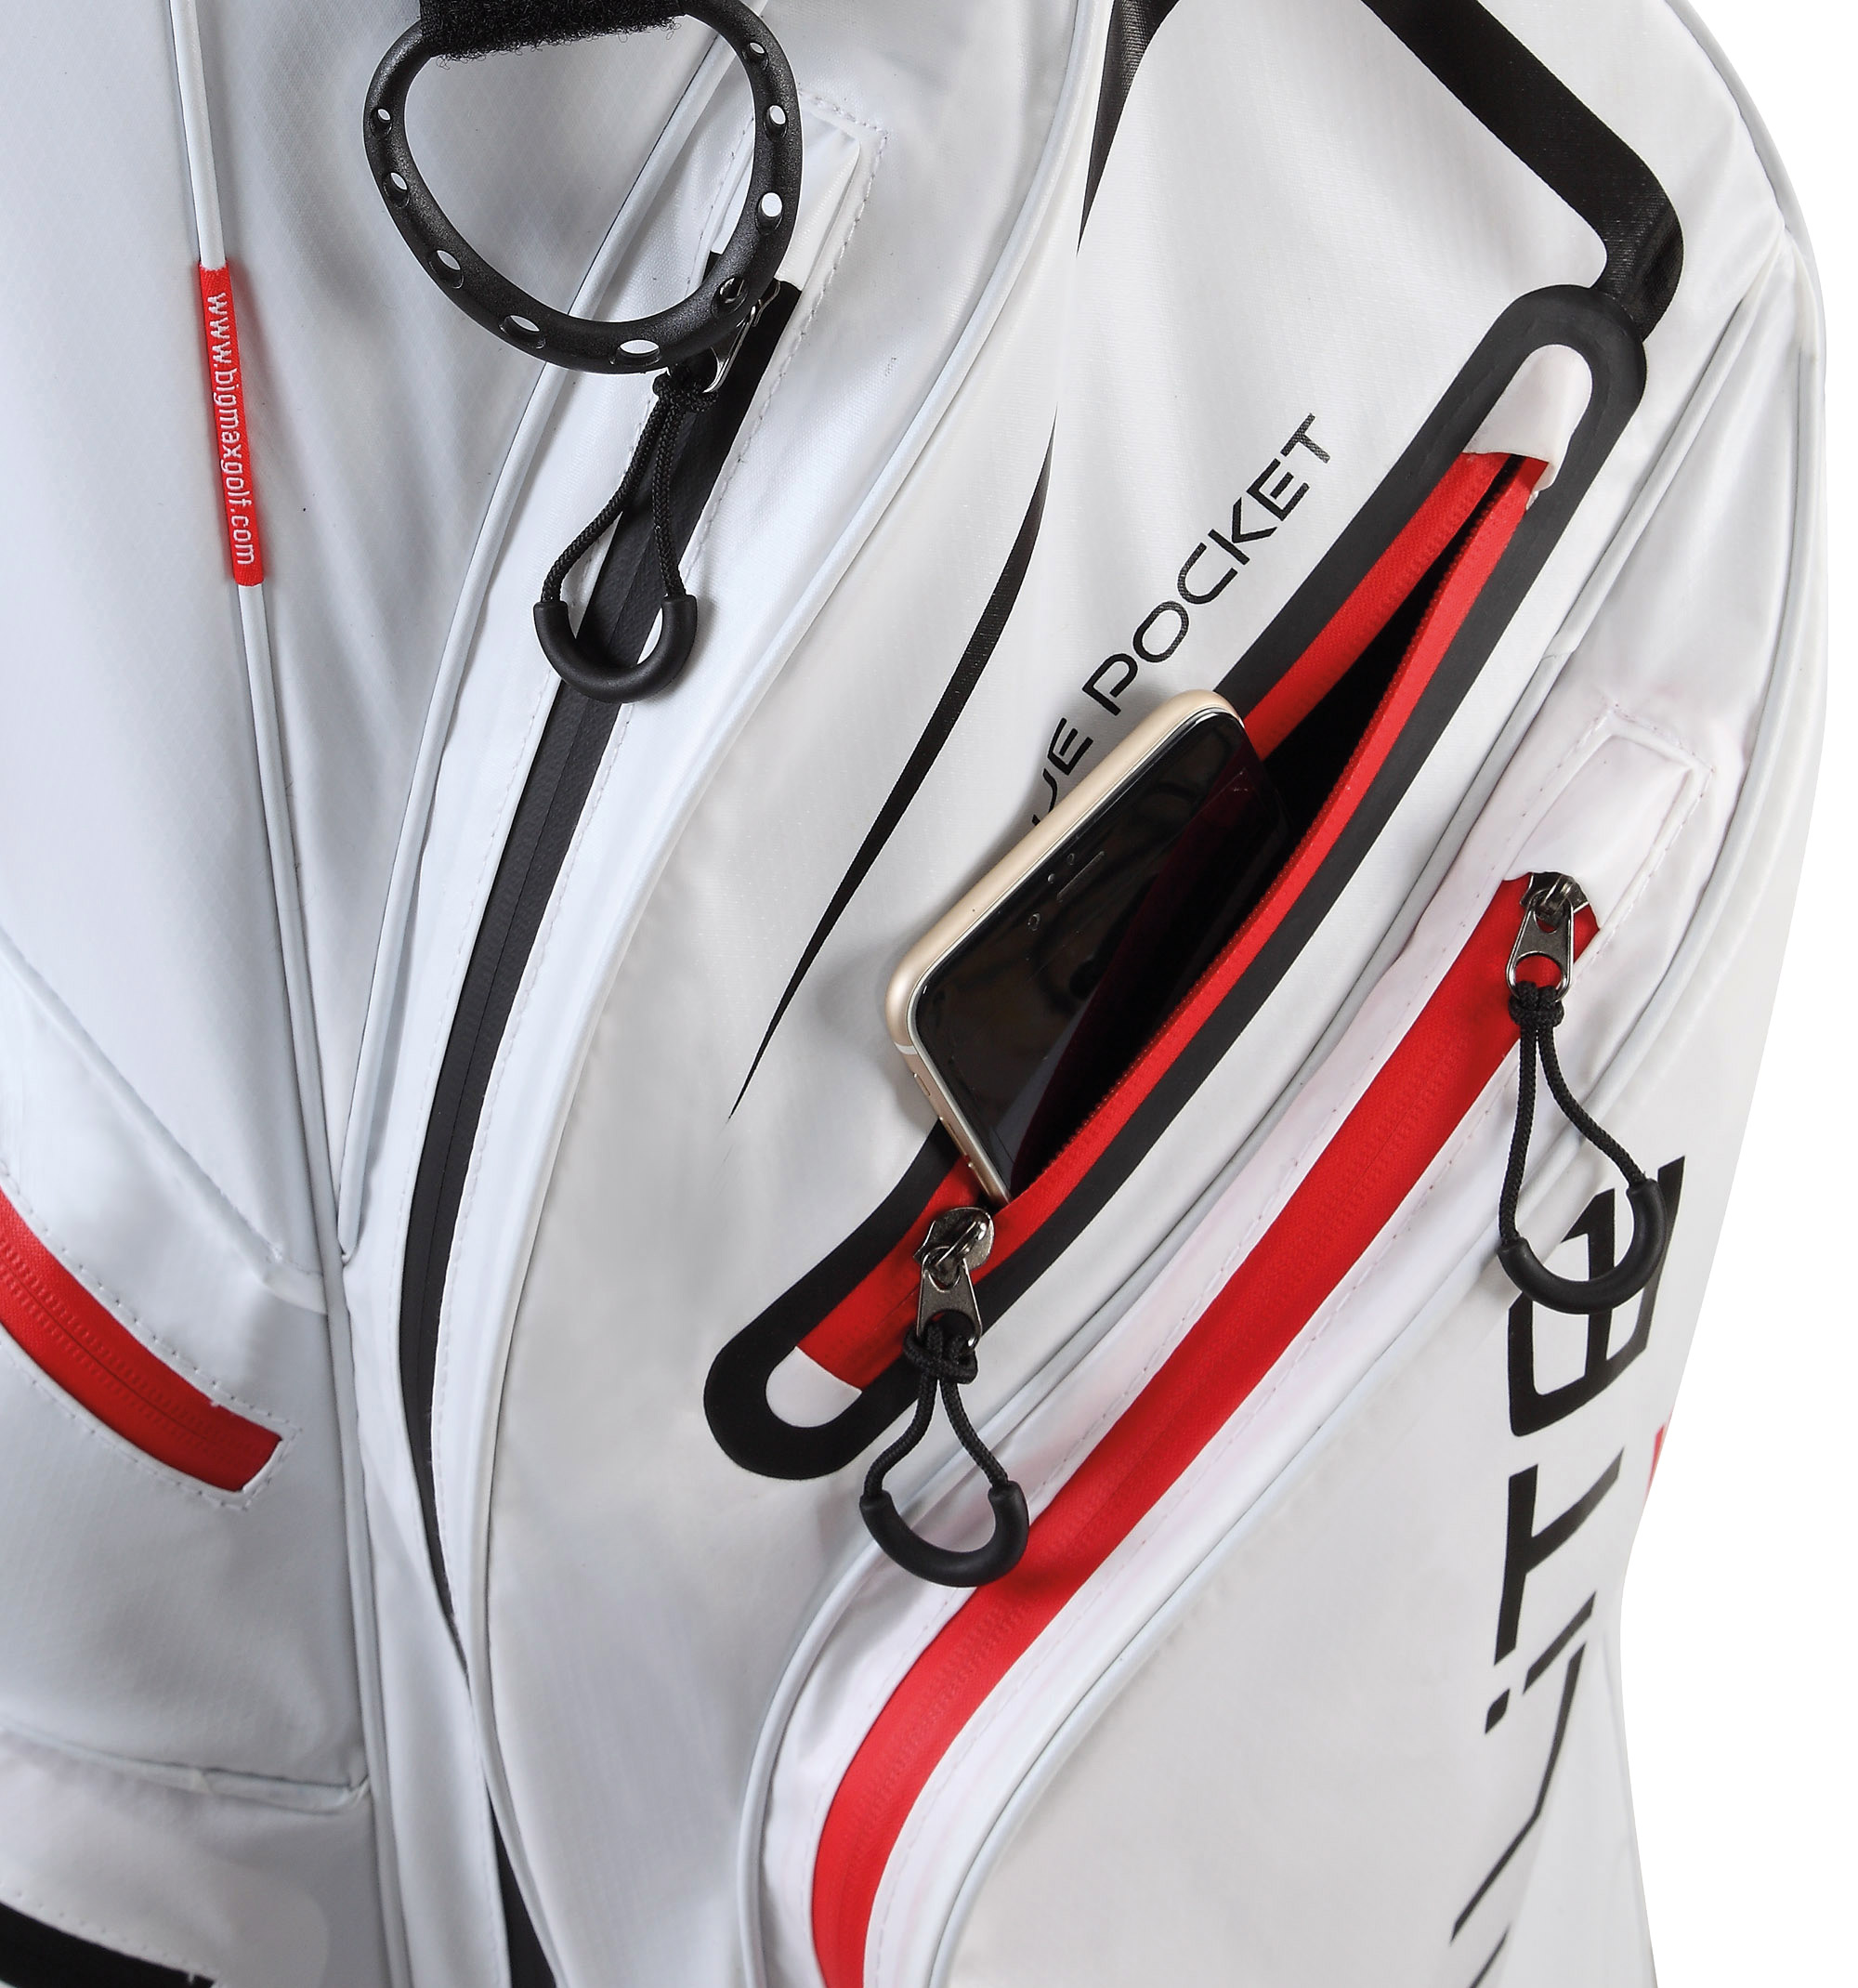 Best Golf Bags: Big Max completes bag lineup for 2018